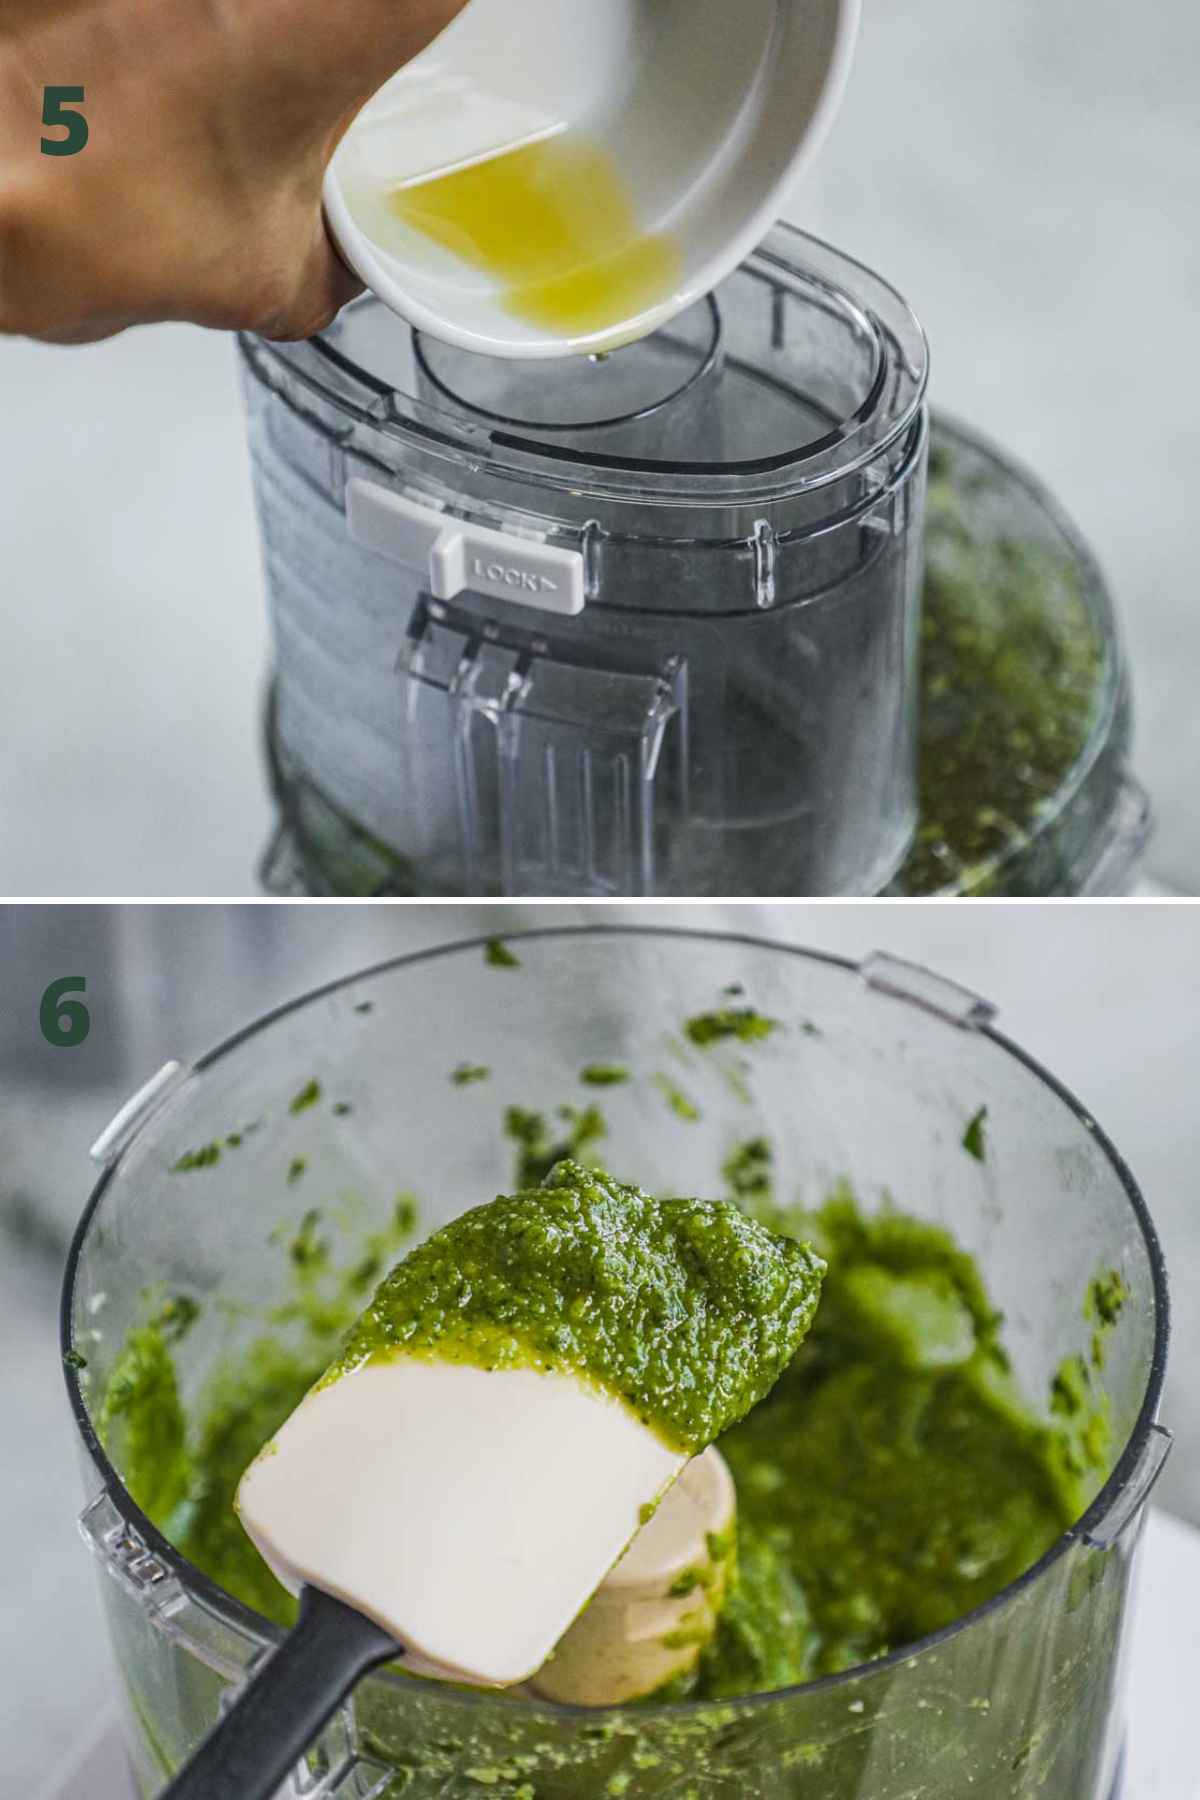 Step to make pesto alla genovese (classic basil pesto), streaming olive oil into food processor with the basil, pine nut, garlic, and cheese mixture.